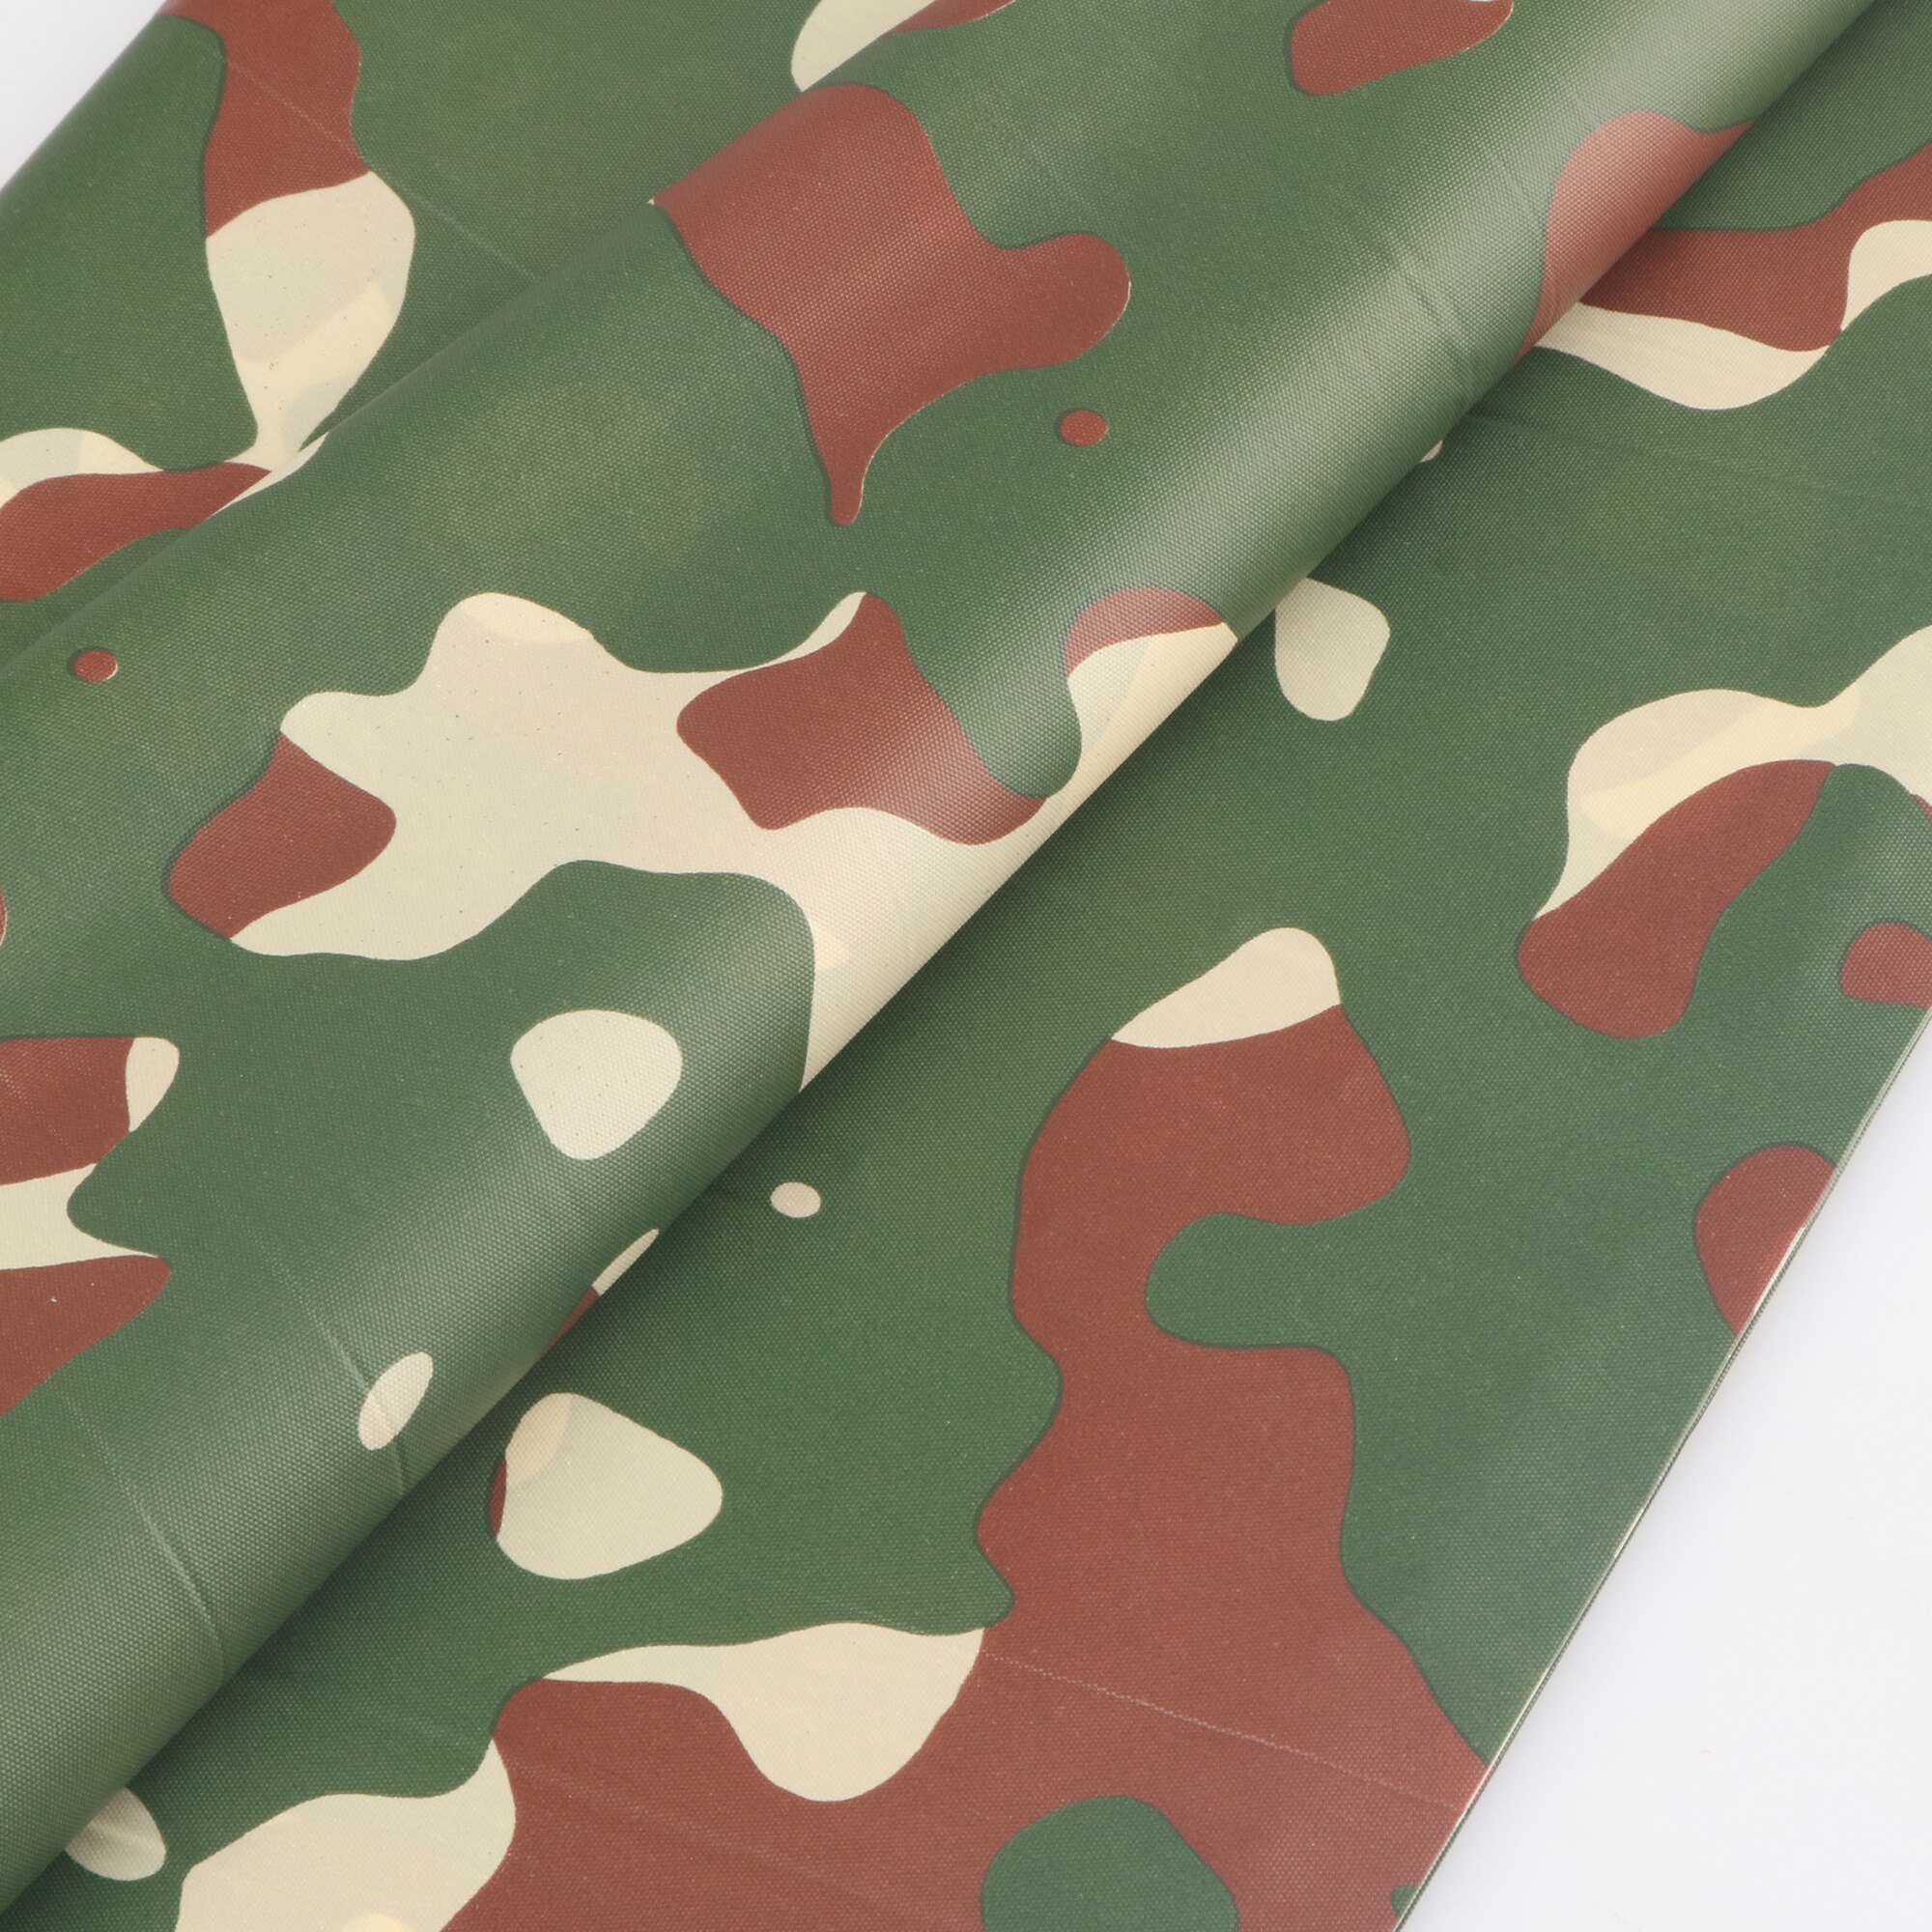 D&Z Disposable PE Tablecloth Camouflage Color for Picnic Outdoor Exercise Table Cover Waterproof